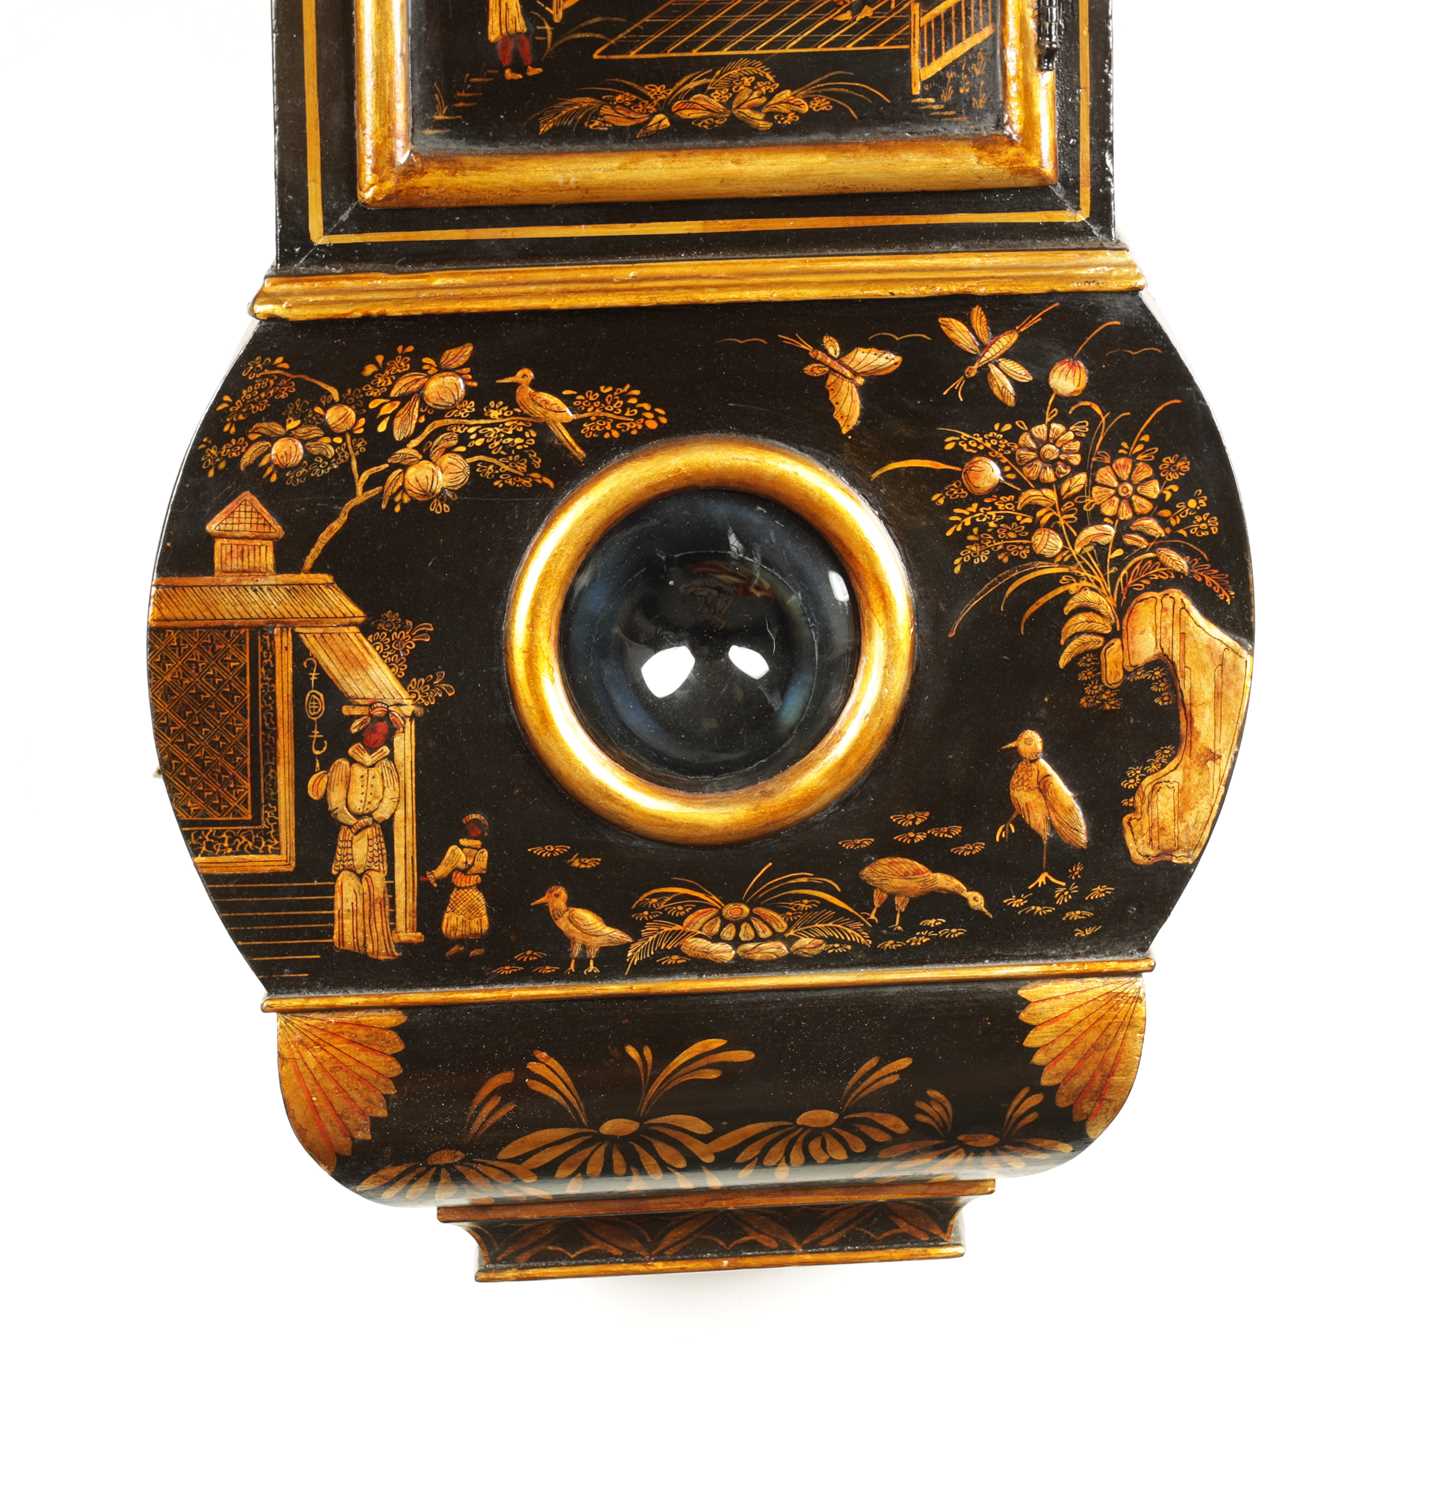 JOHN TICKELL, CREDITON. A RARE EARLY 18TH CENTURY LACQUERED CHINOISERIE TAVERN CLOCK OF LARGE SIZE - Image 2 of 21